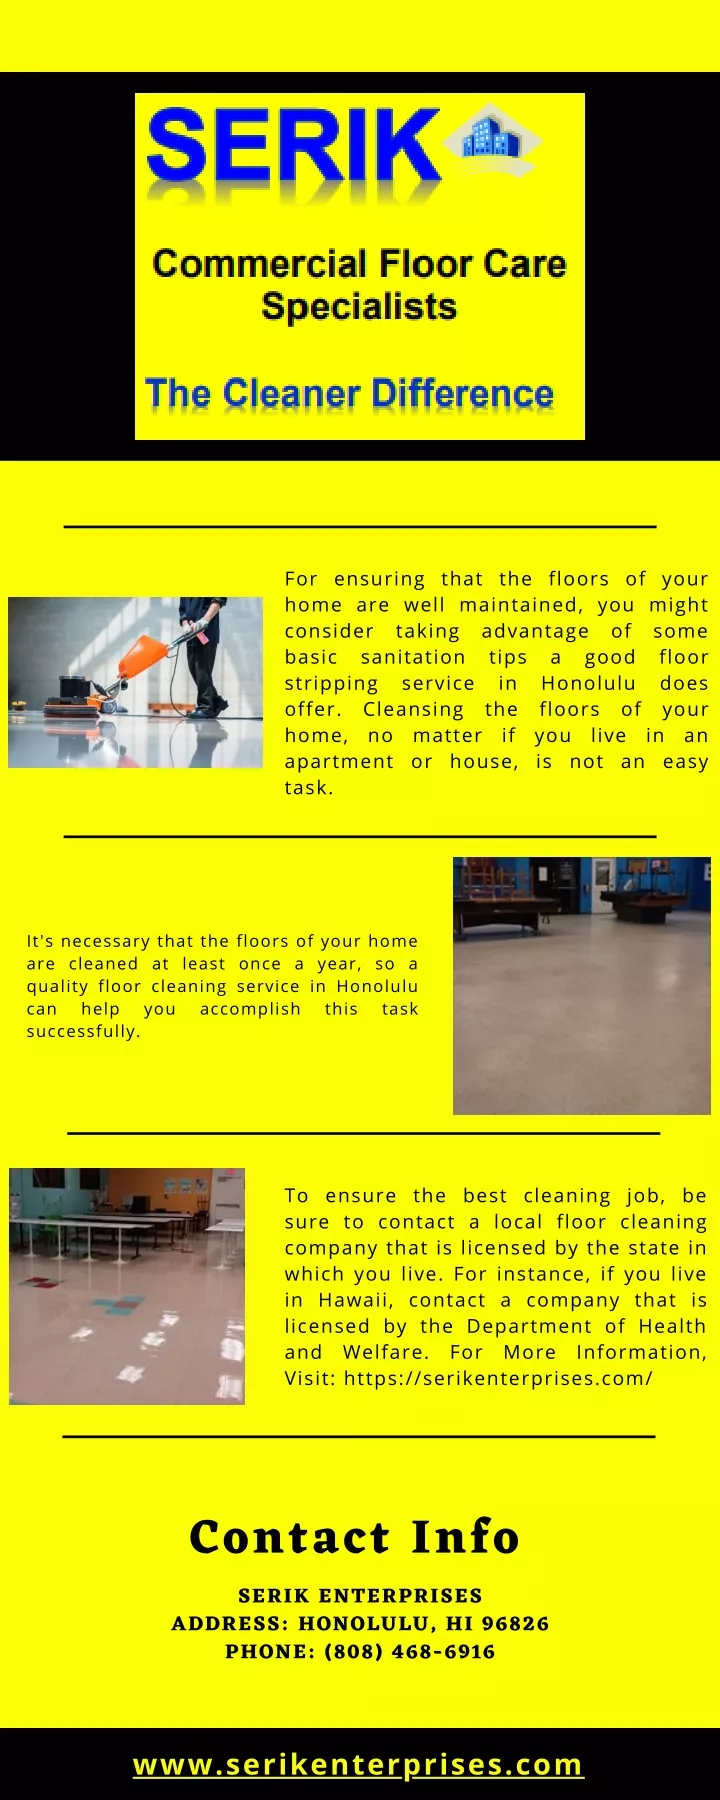 for ensuring that the floors of your home